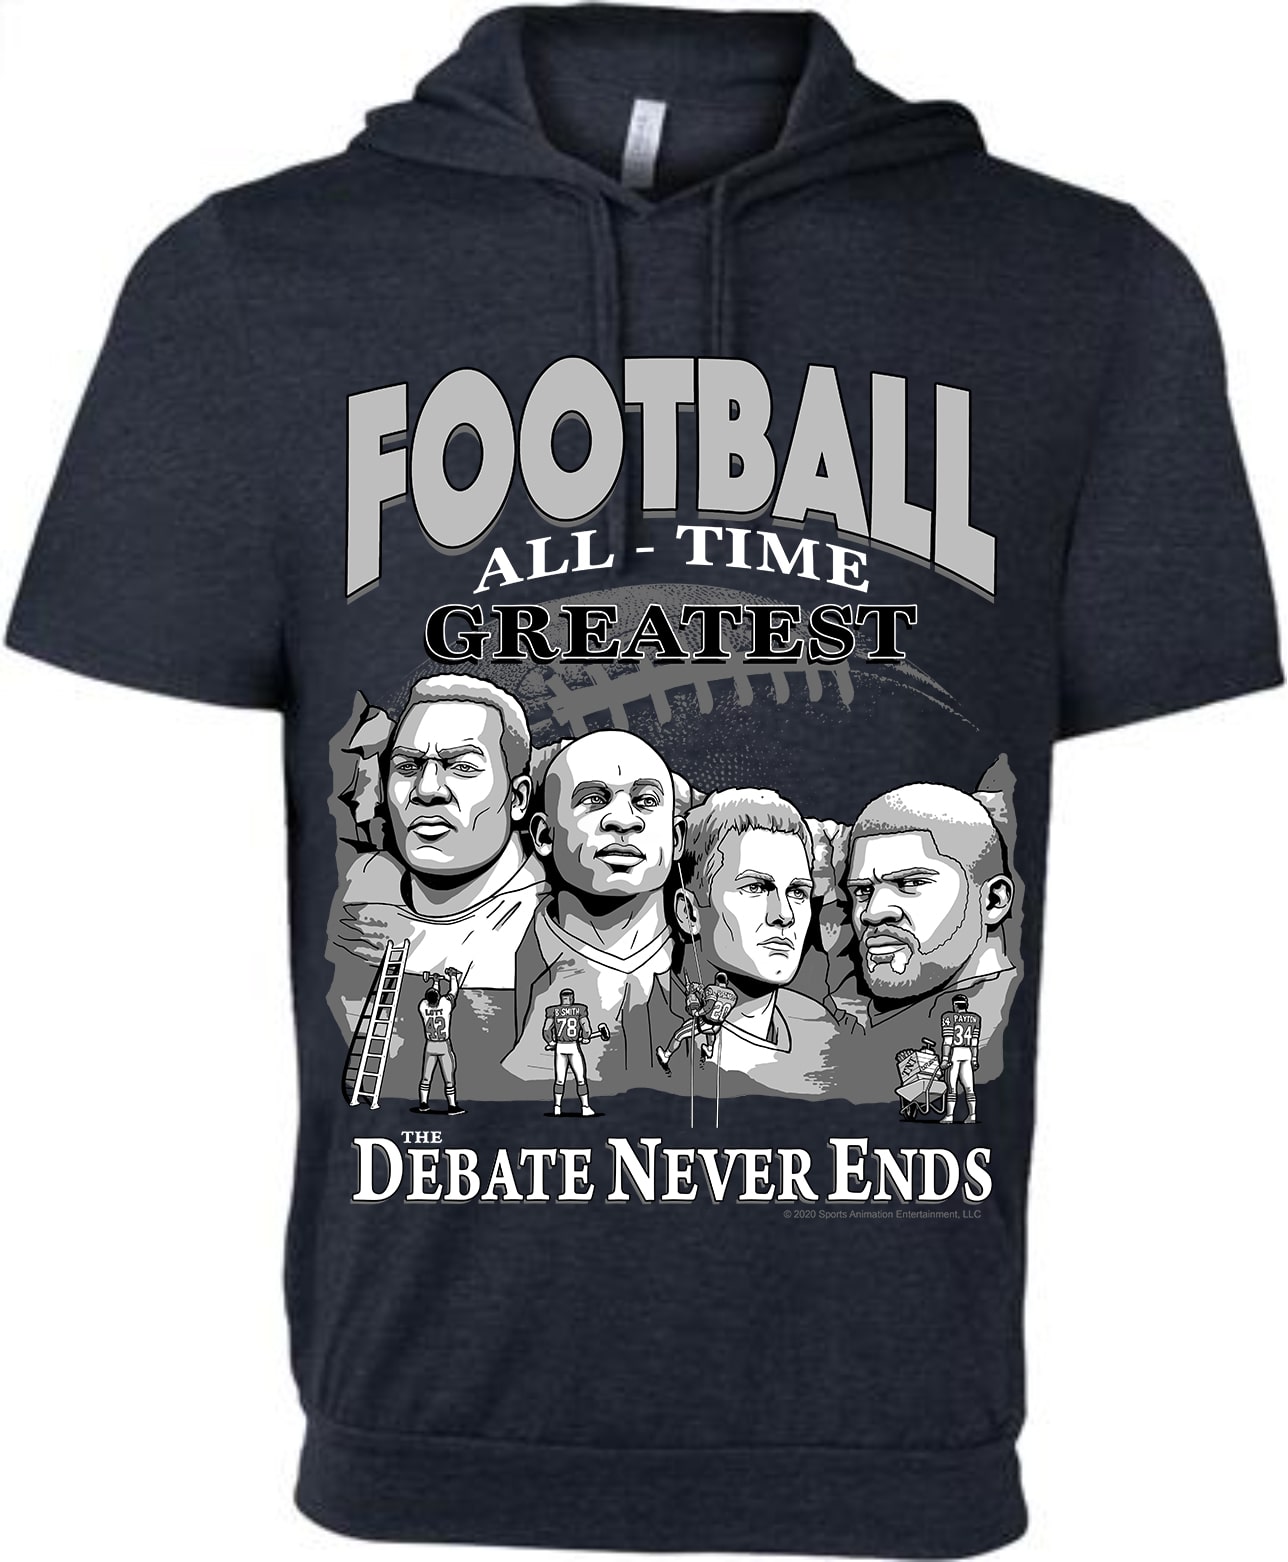 Mount Rushmore – Football All-Time Greatest (Black Short Sleeve Hoodie)